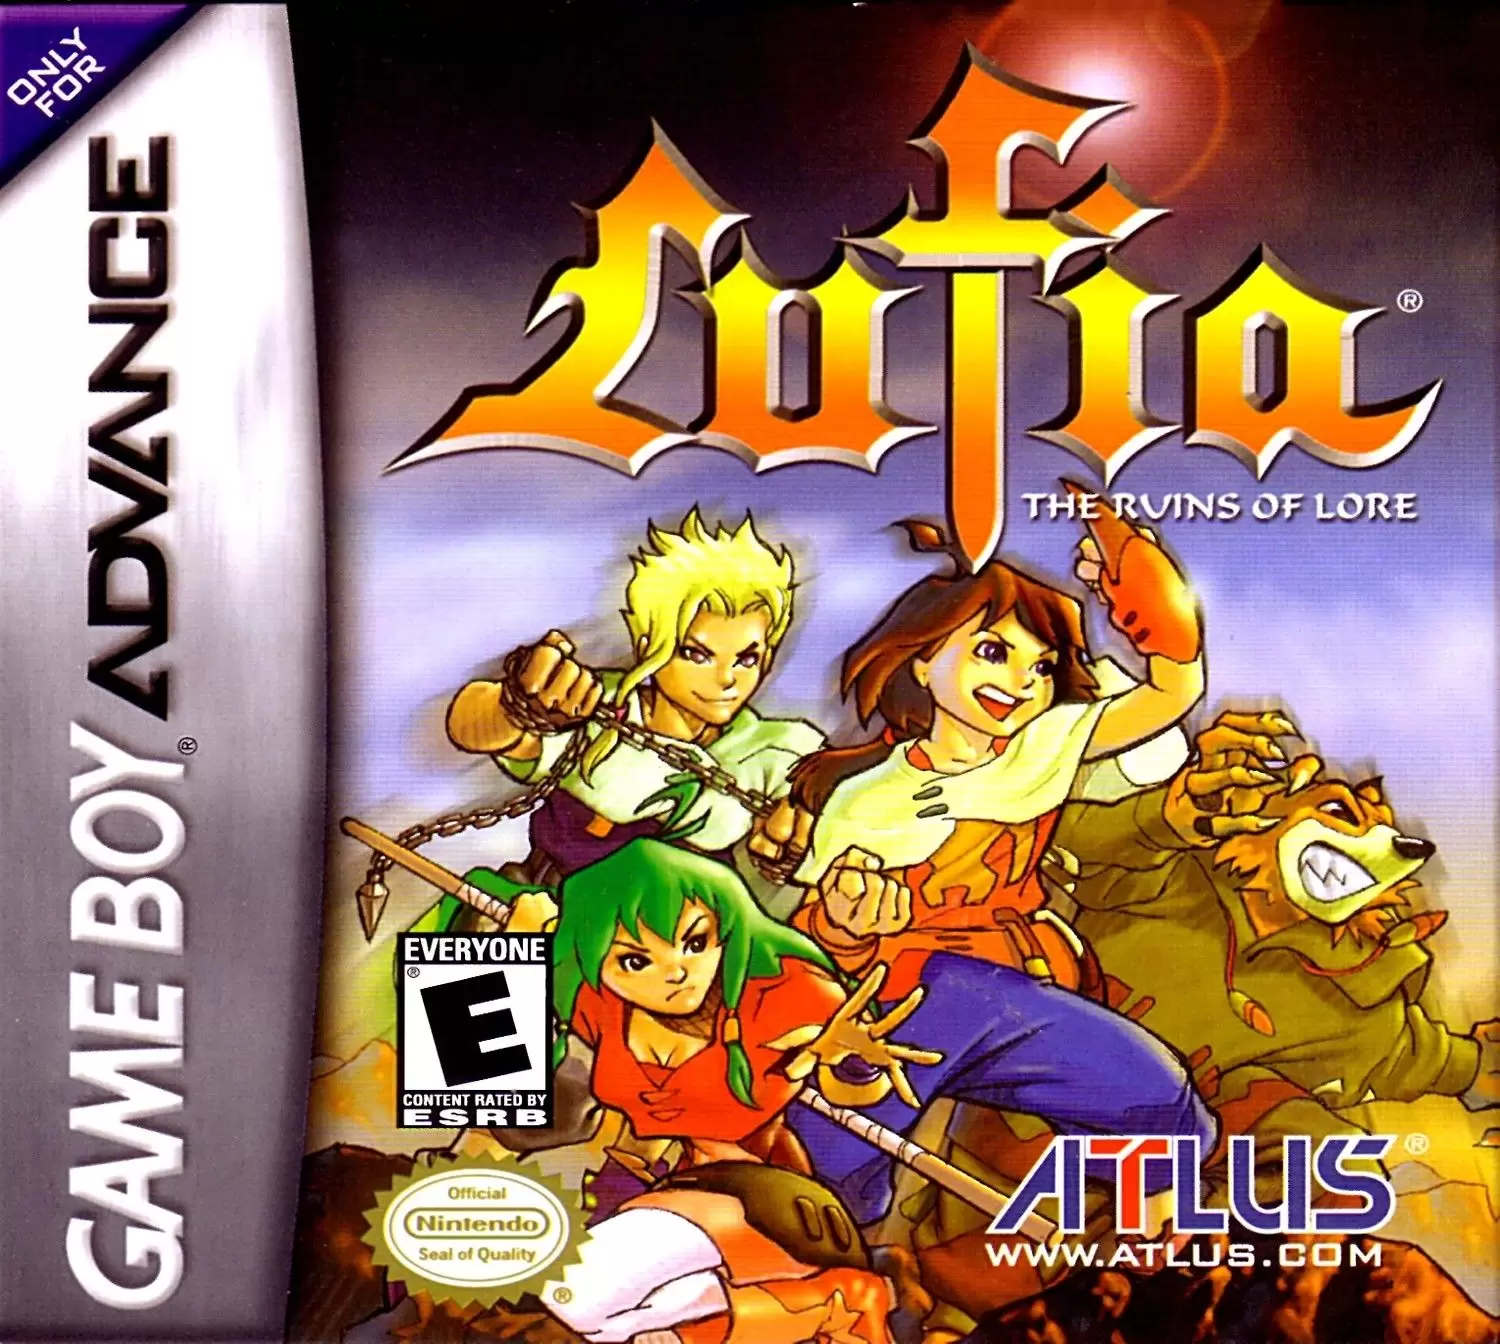 Game Boy Advance Games - Lufia: The Ruins of Lore